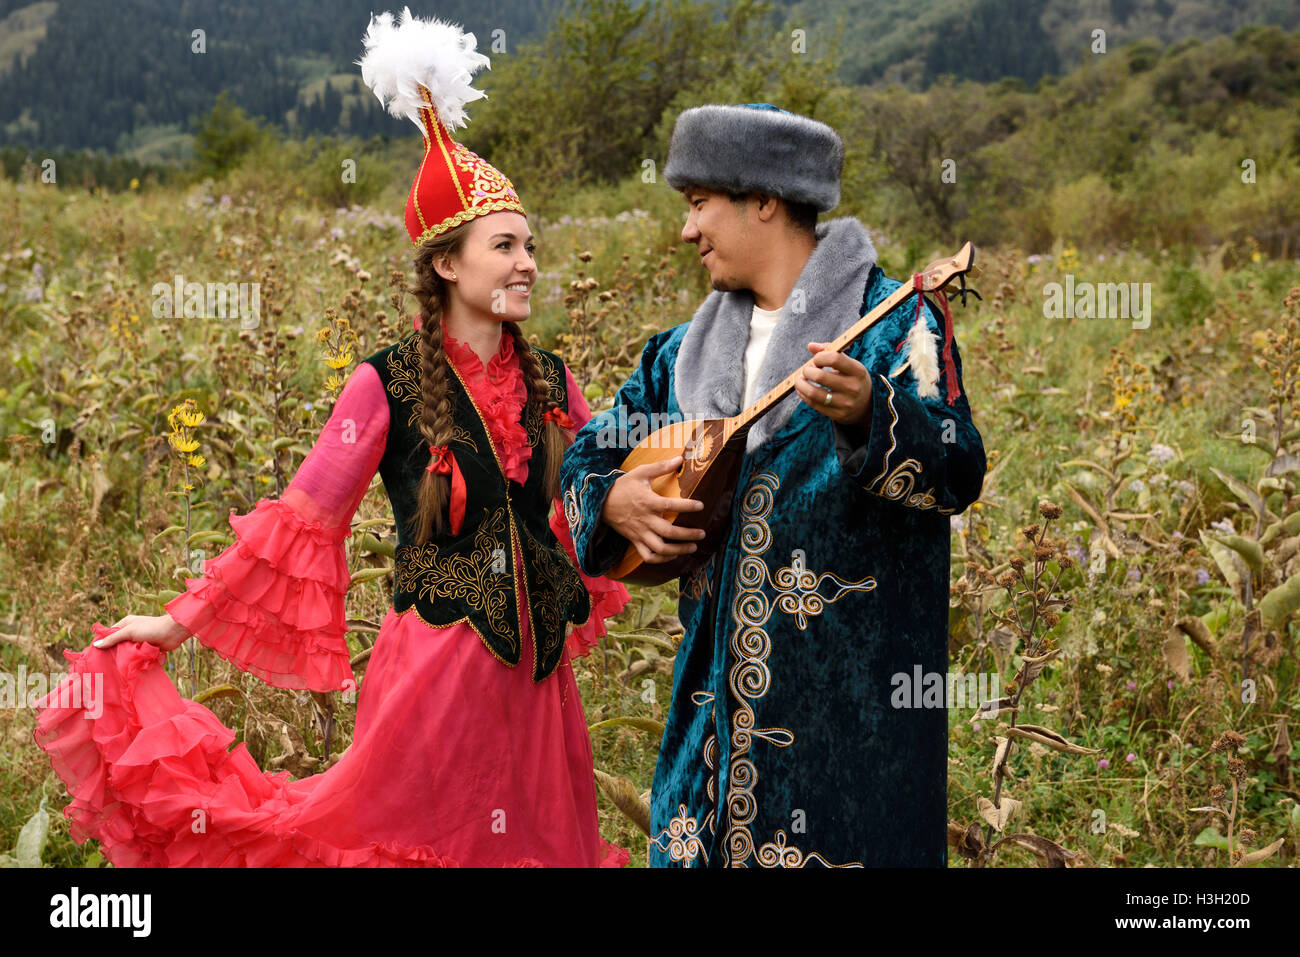 Man playing dombra and woman in traditional Kazakh dress in a field at Huns village Kazakhstan Stock Photo